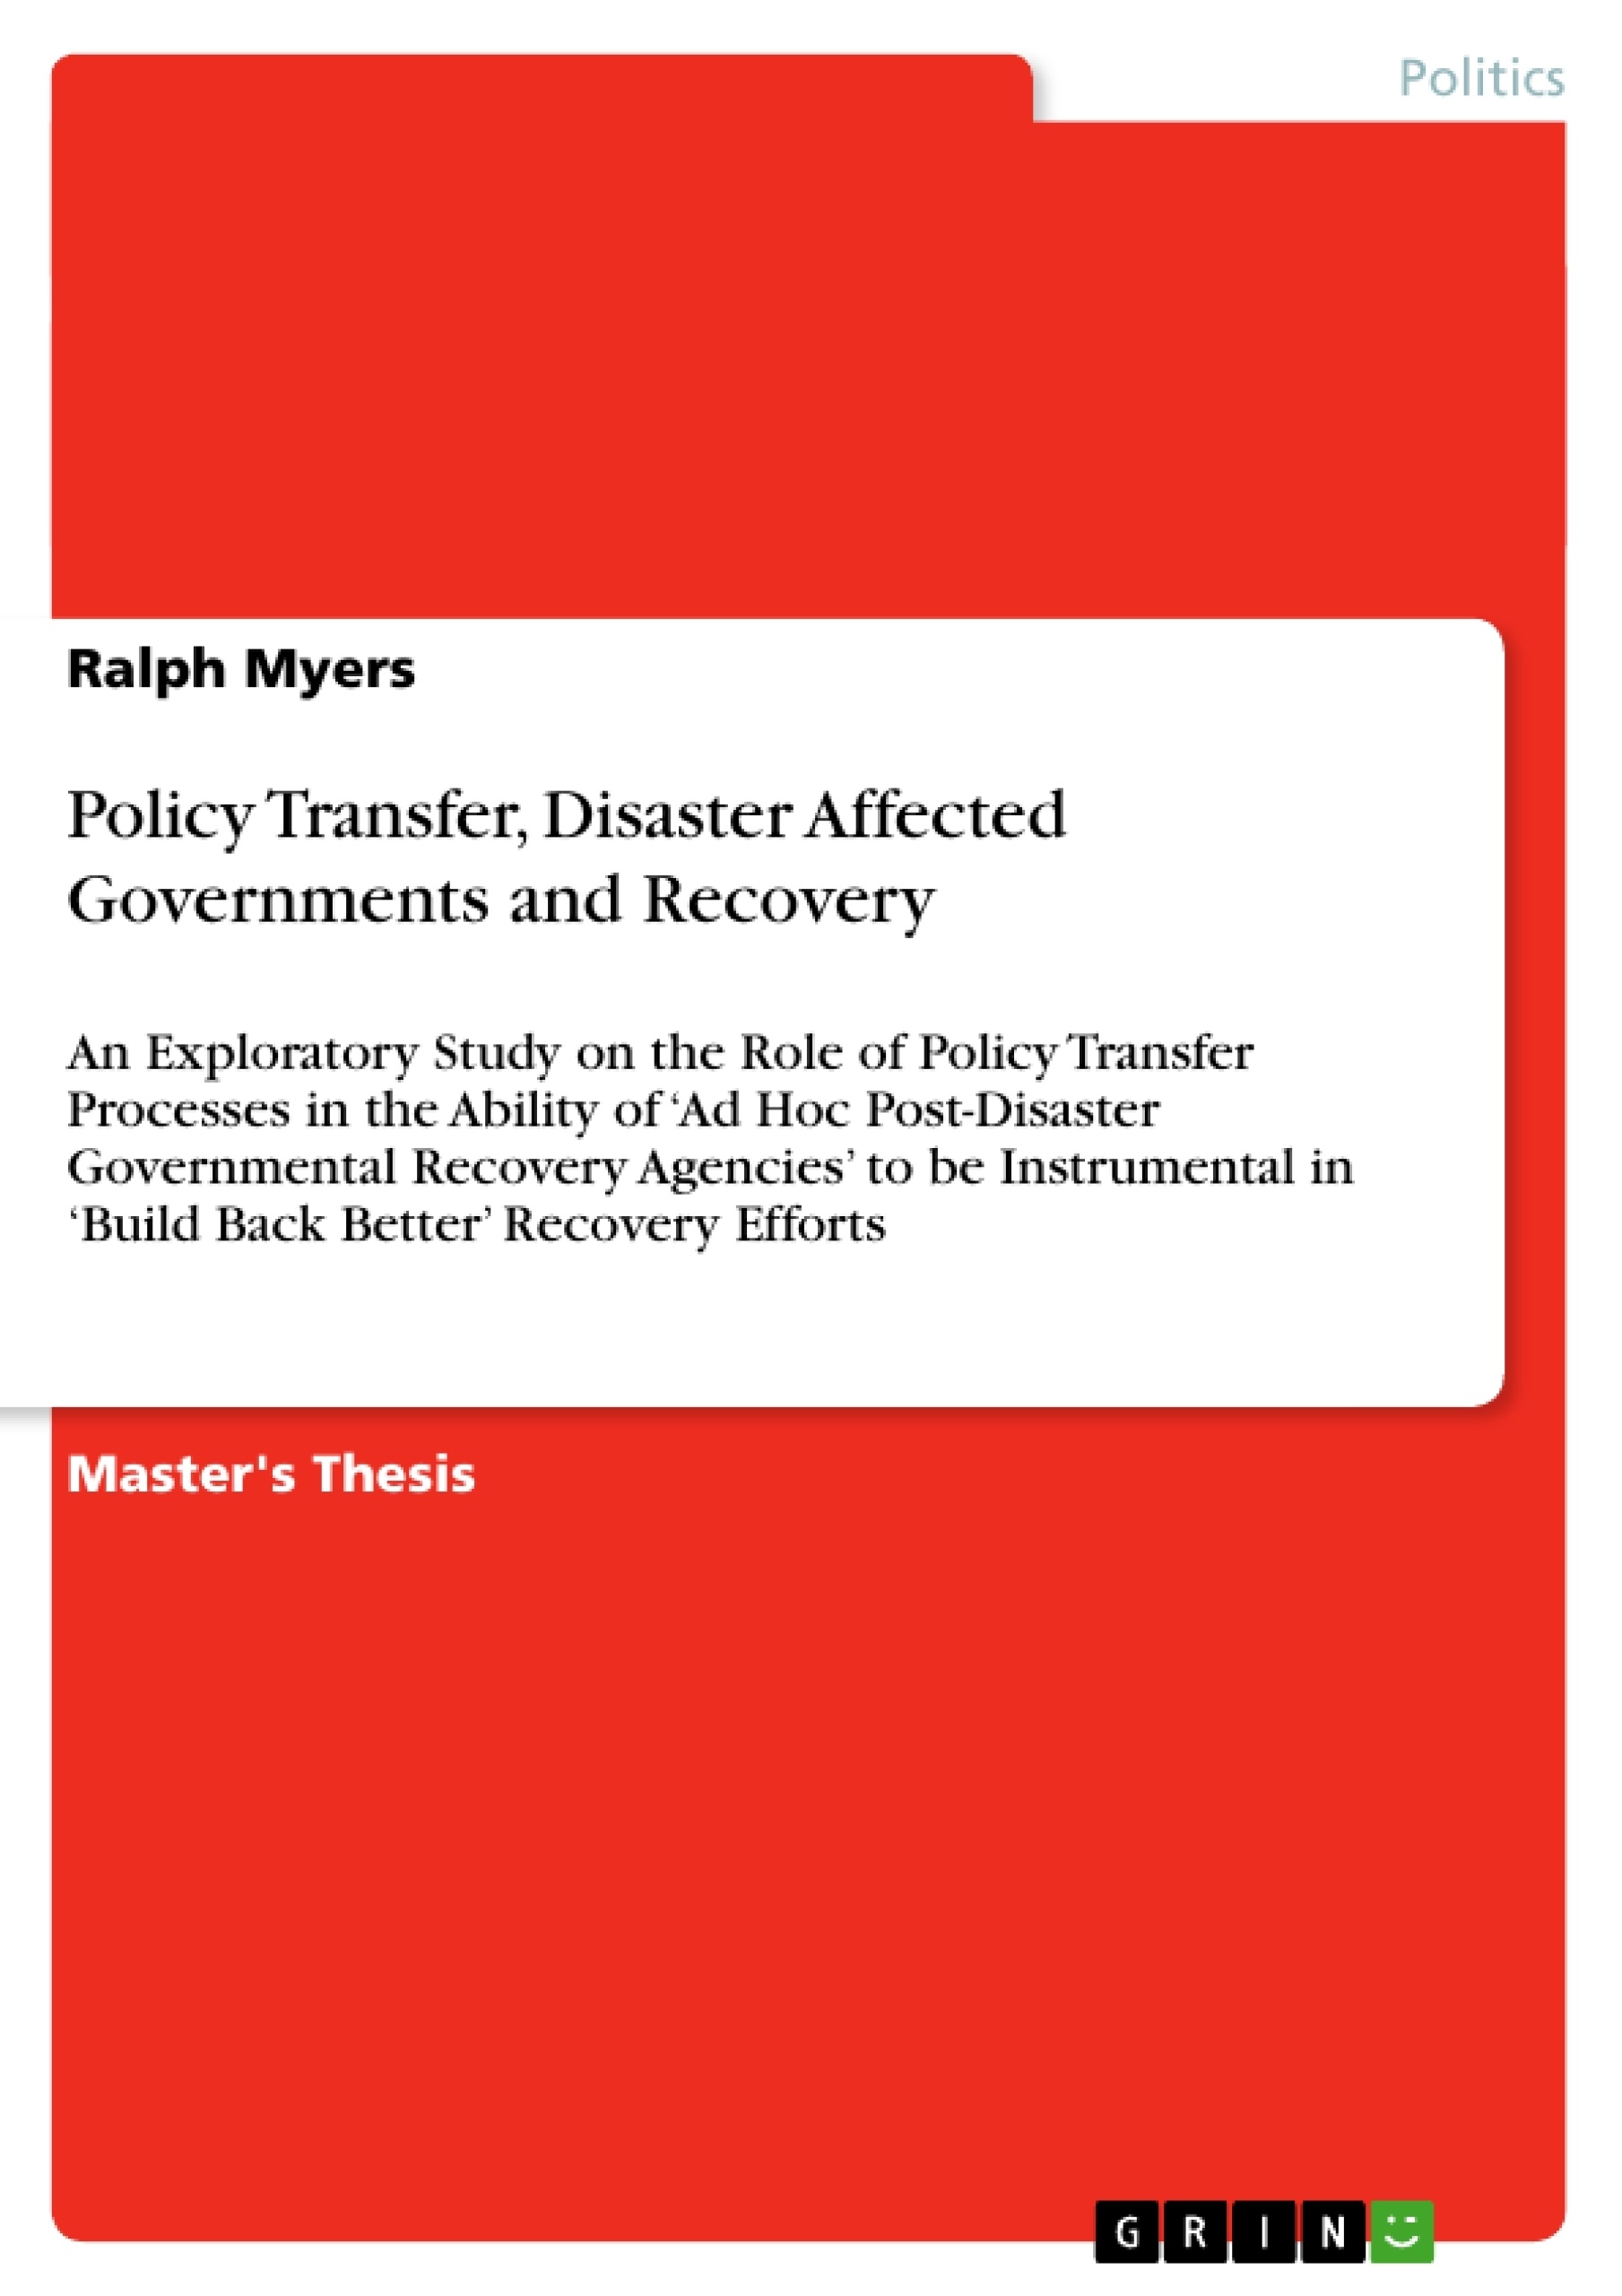 Title: Policy Transfer, Disaster Affected Governments and Recovery